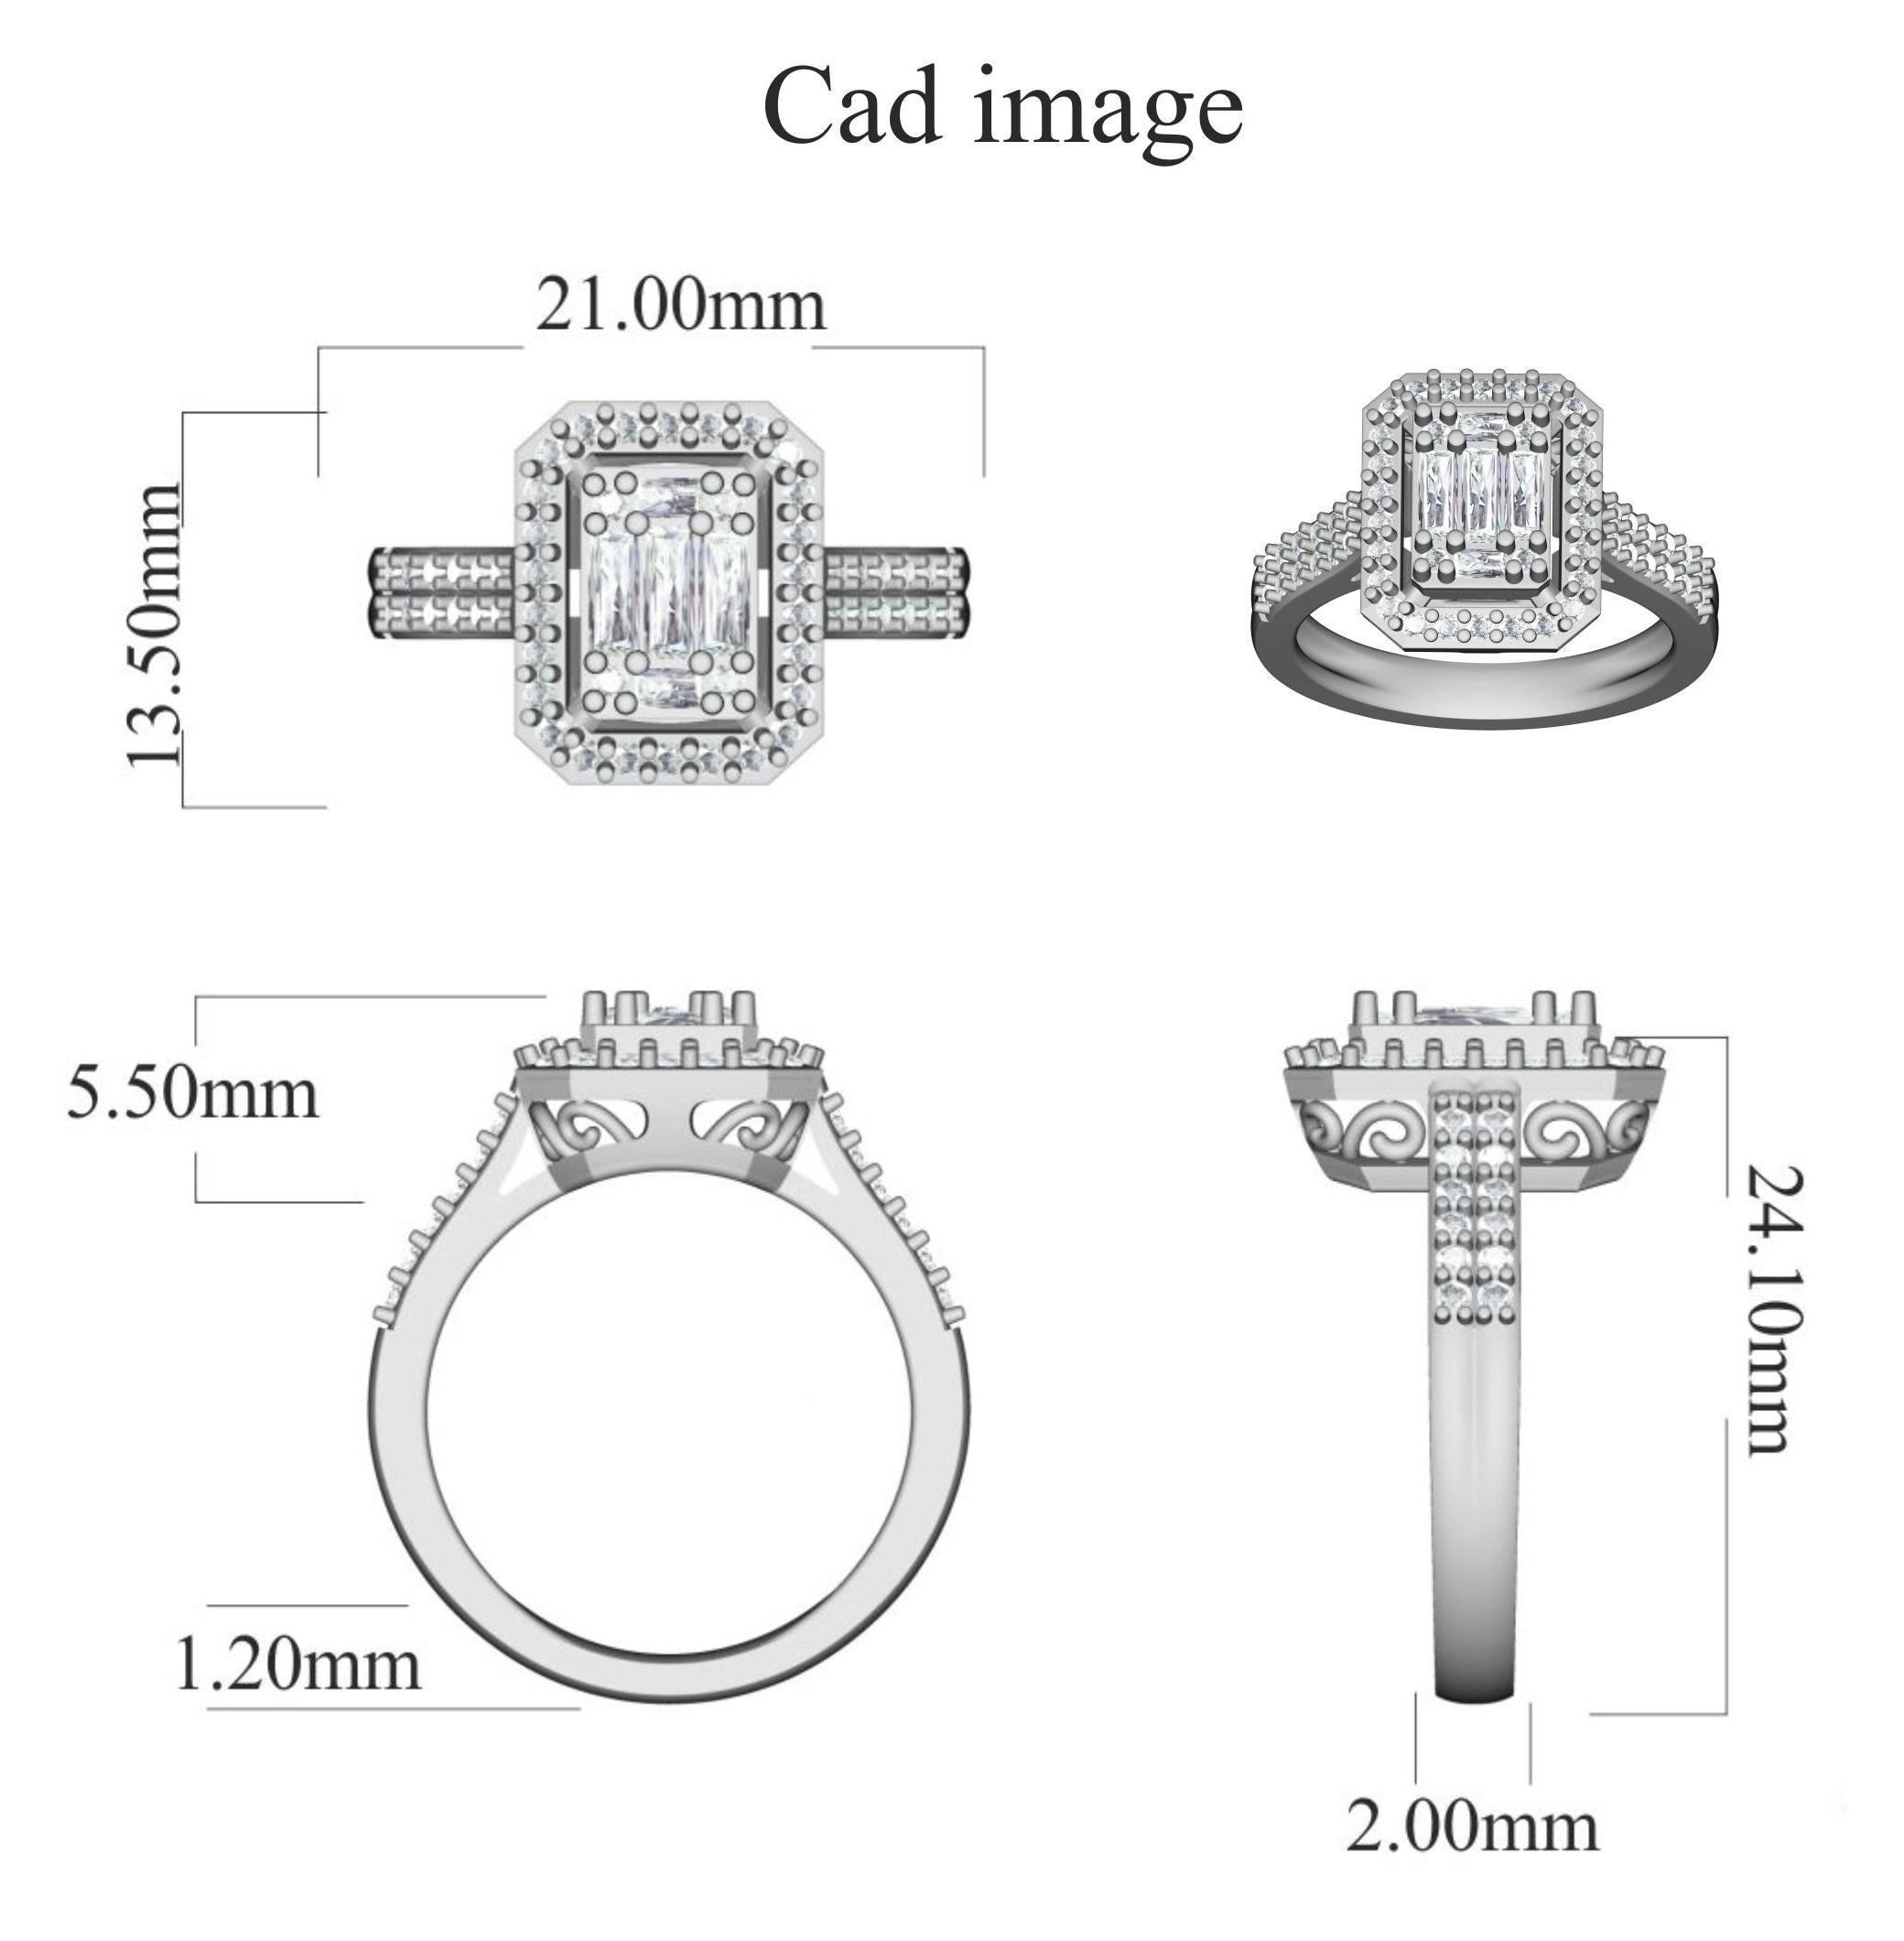 Show her what she meant to you with this round diamond frame cluster design bridal ring. The ring is crafted from 14-karat white gold and features 54 Round and 5 Baguette cut white diamonds, with Prong set, H-I color I2 clarity and a high polish